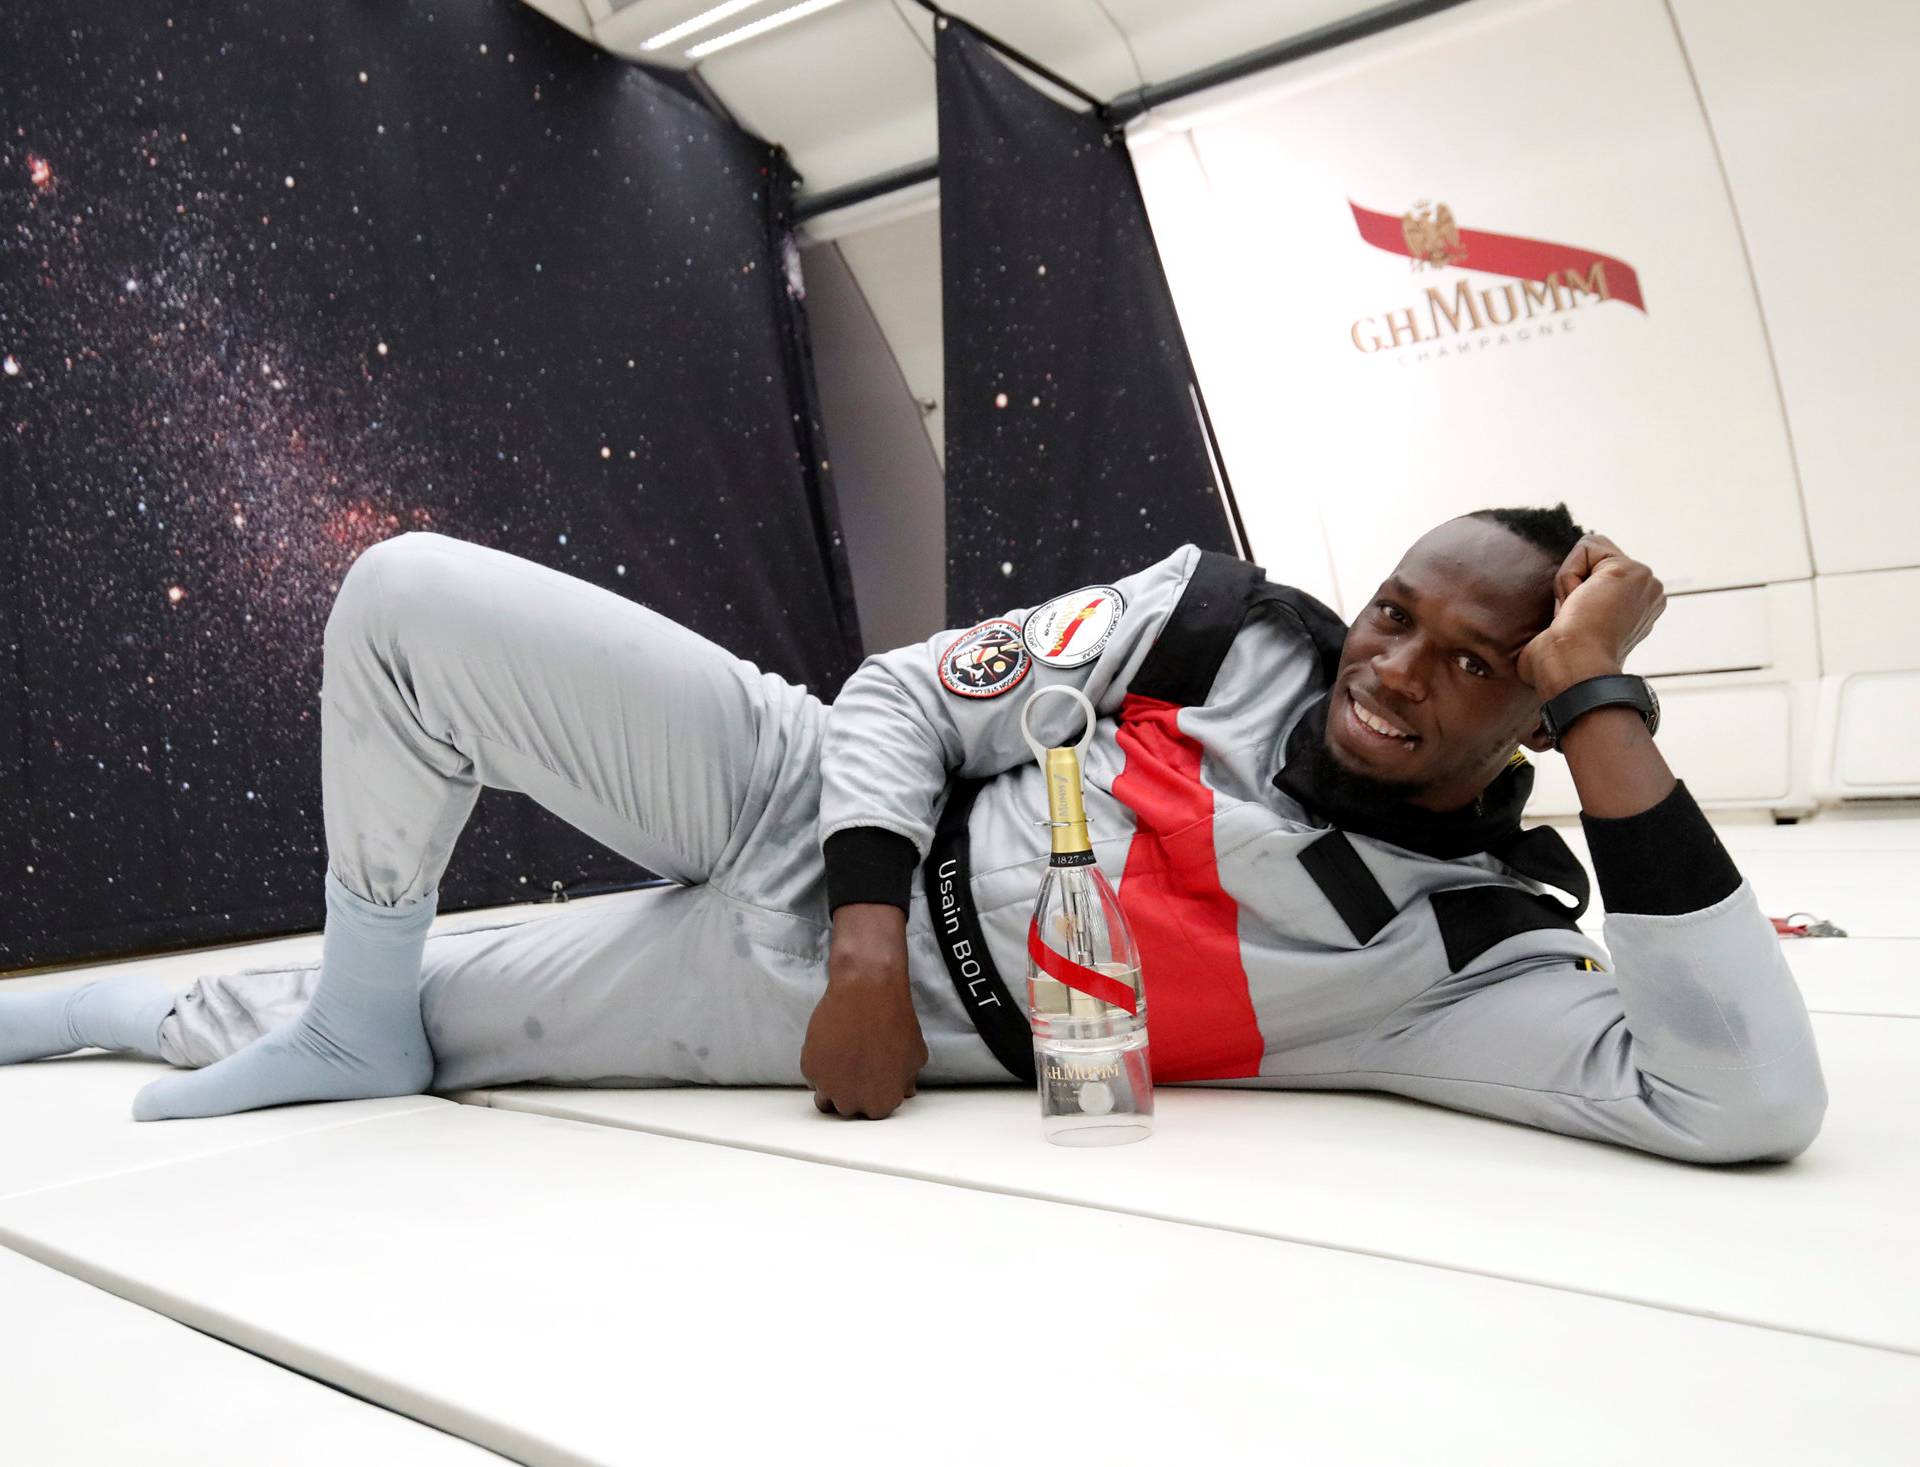 Retired sprinter Usain Bolt poses with a bottle of "Mumm Grand Cordon Stellar" champagne as he enjoys zero gravity conditions during a flight in a specially modified Airbus Zero-G plane above Reims